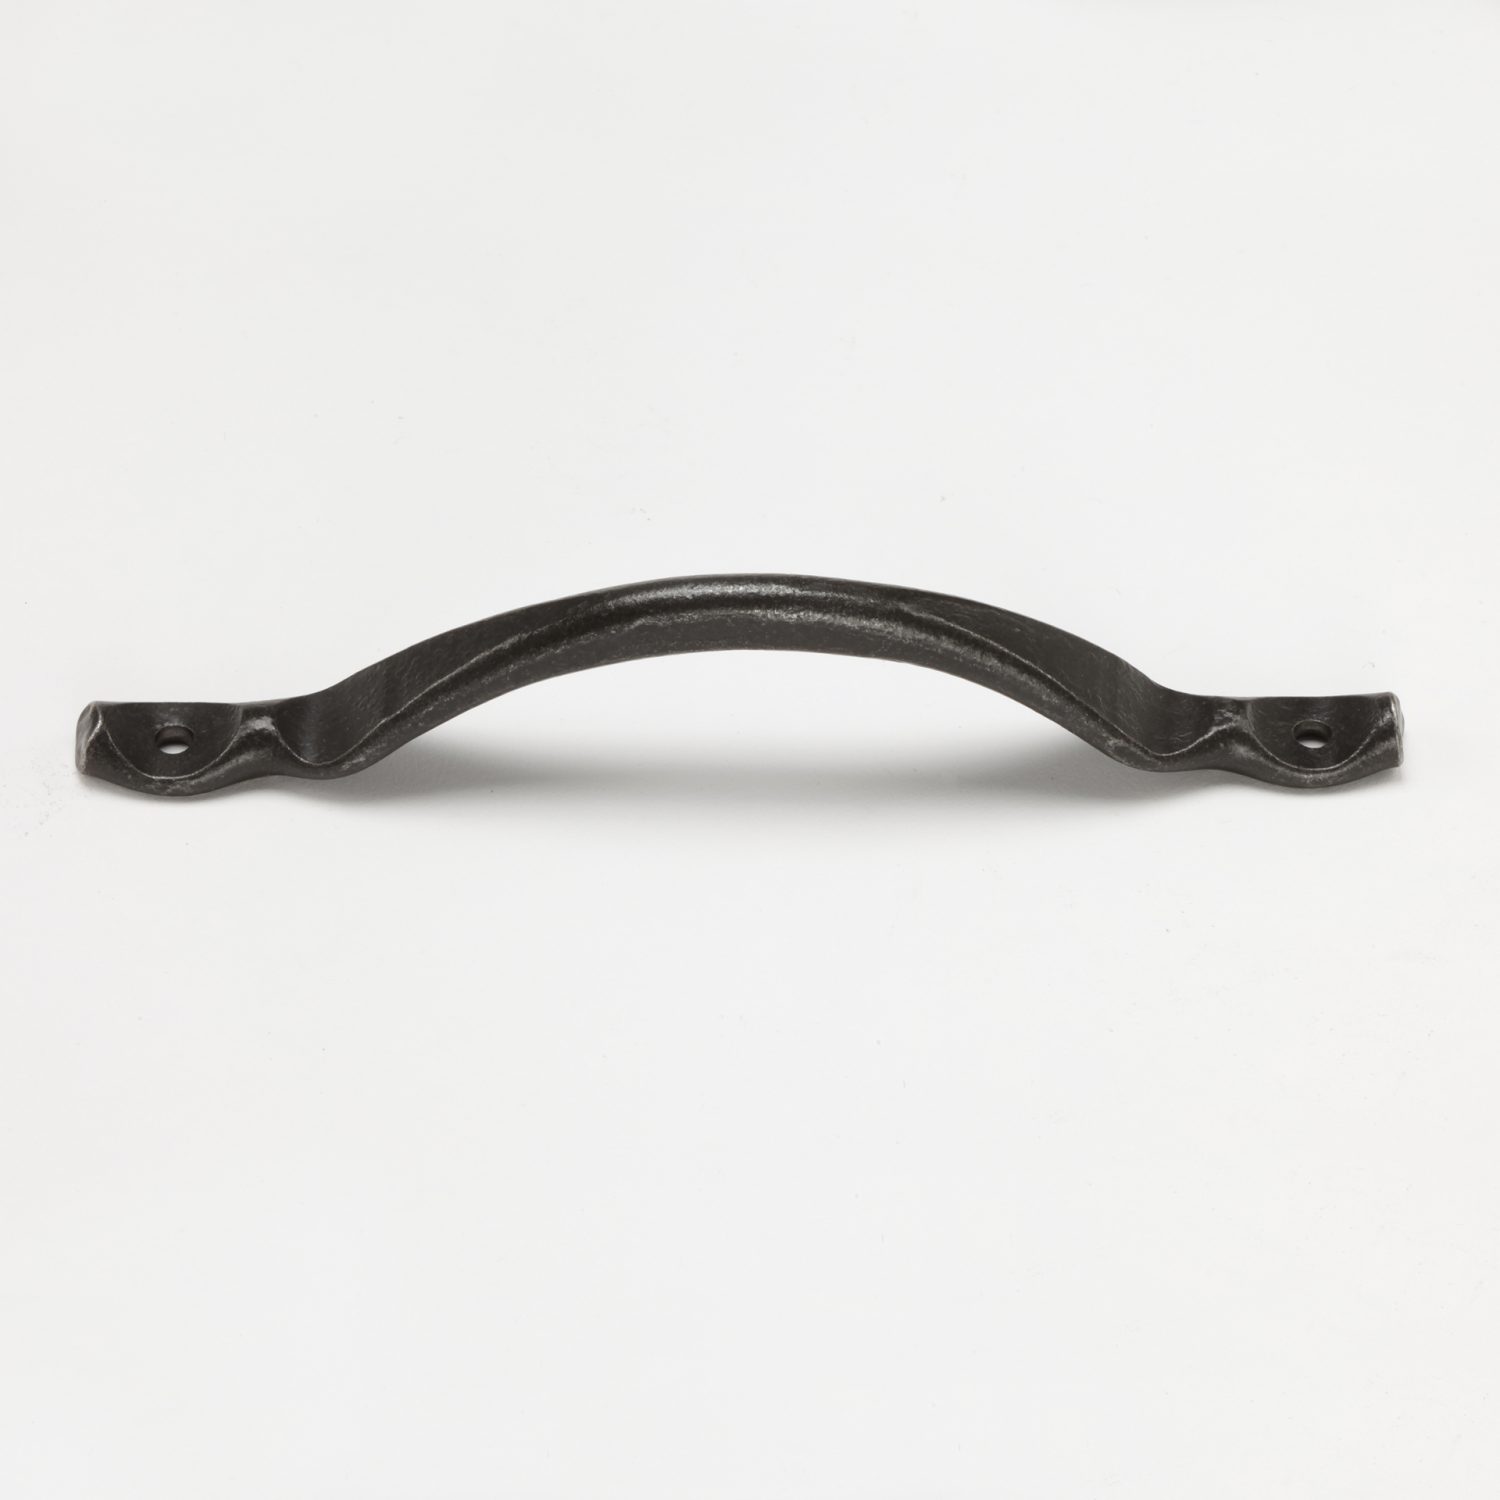 Decorative Wrought Iron Drawer Pull 0904 Northern Crescent Iron